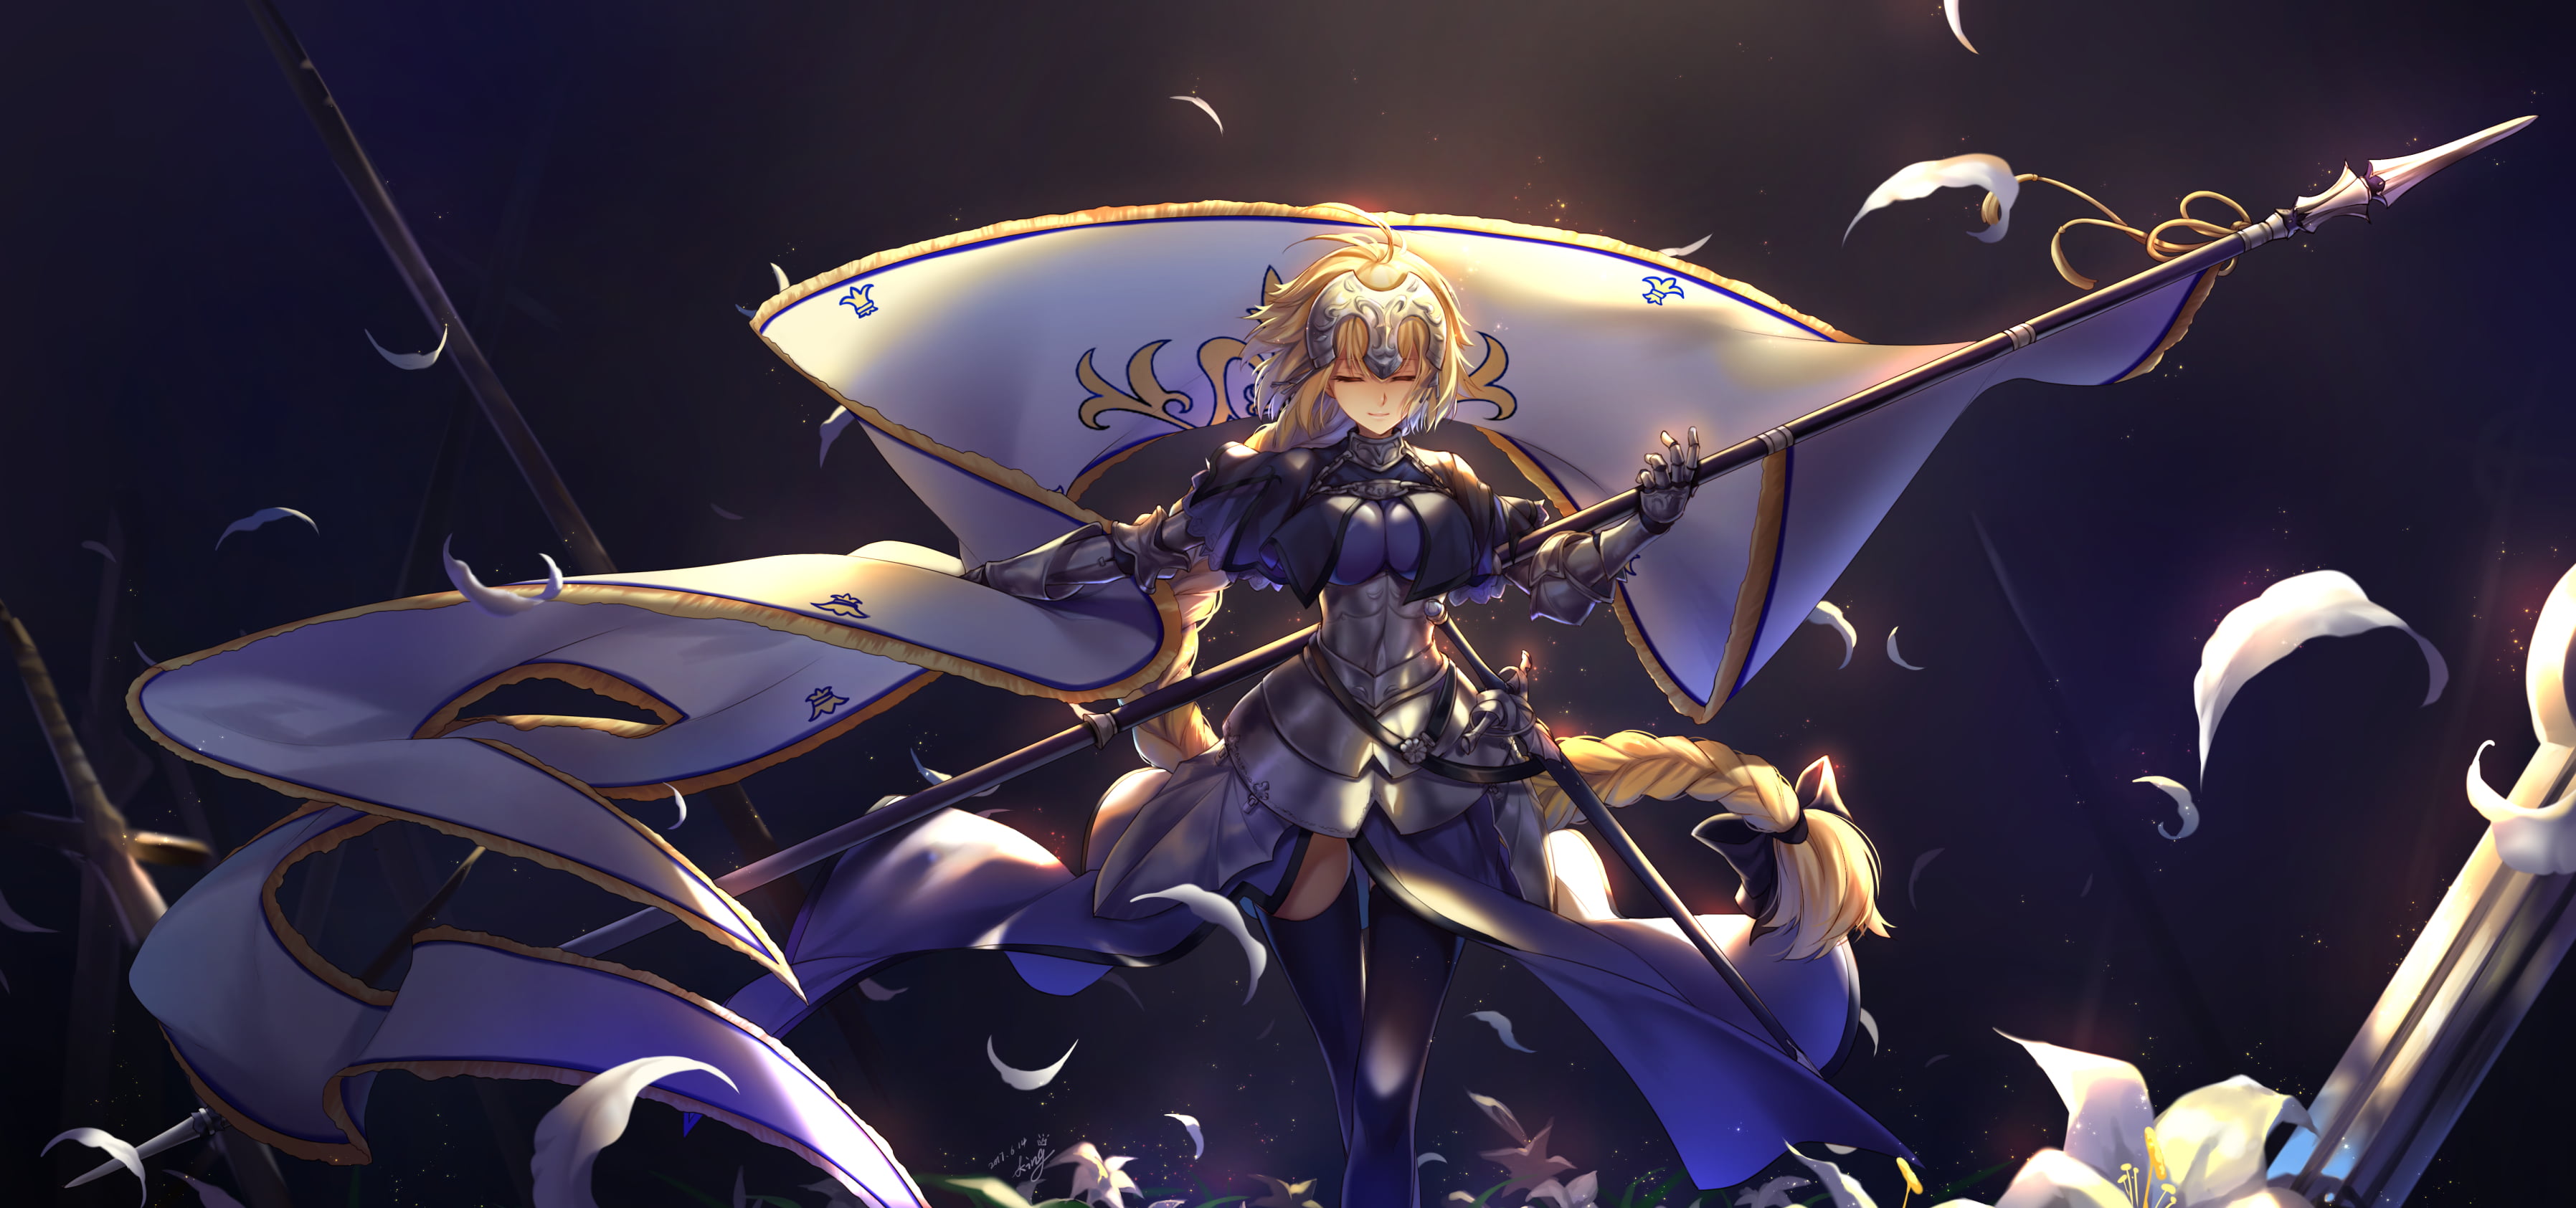 Saber From Fate Stay Knight Fate Grand Order Fate Series Jeanne D Arc Spear Hd Wallpaper Wallpaper Flare